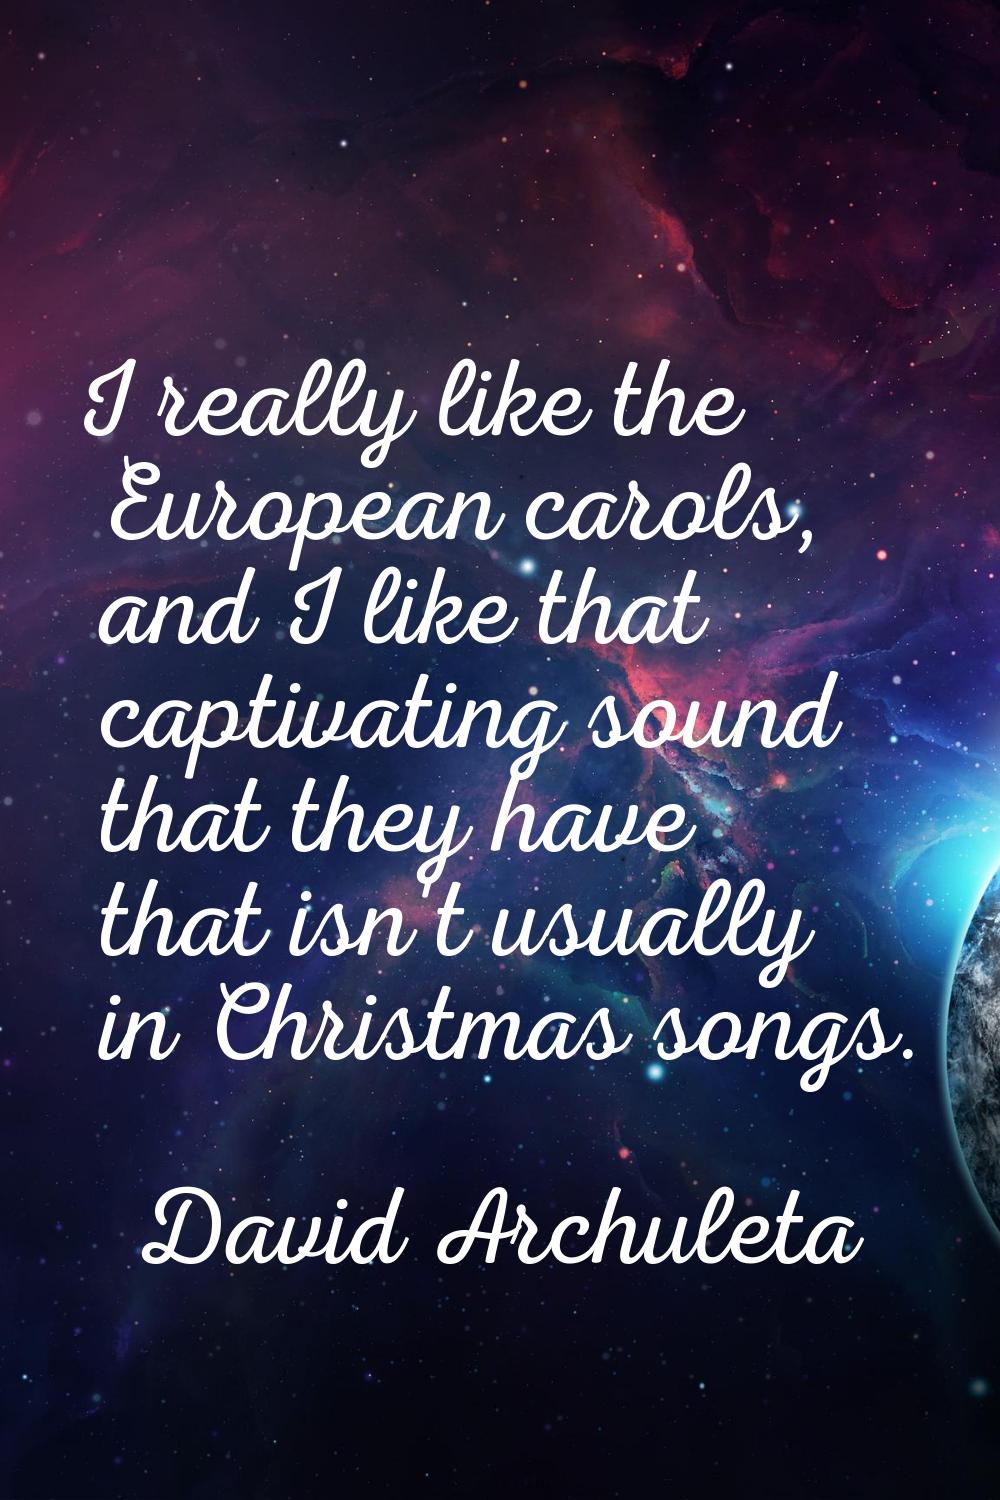 I really like the European carols, and I like that captivating sound that they have that isn't usua